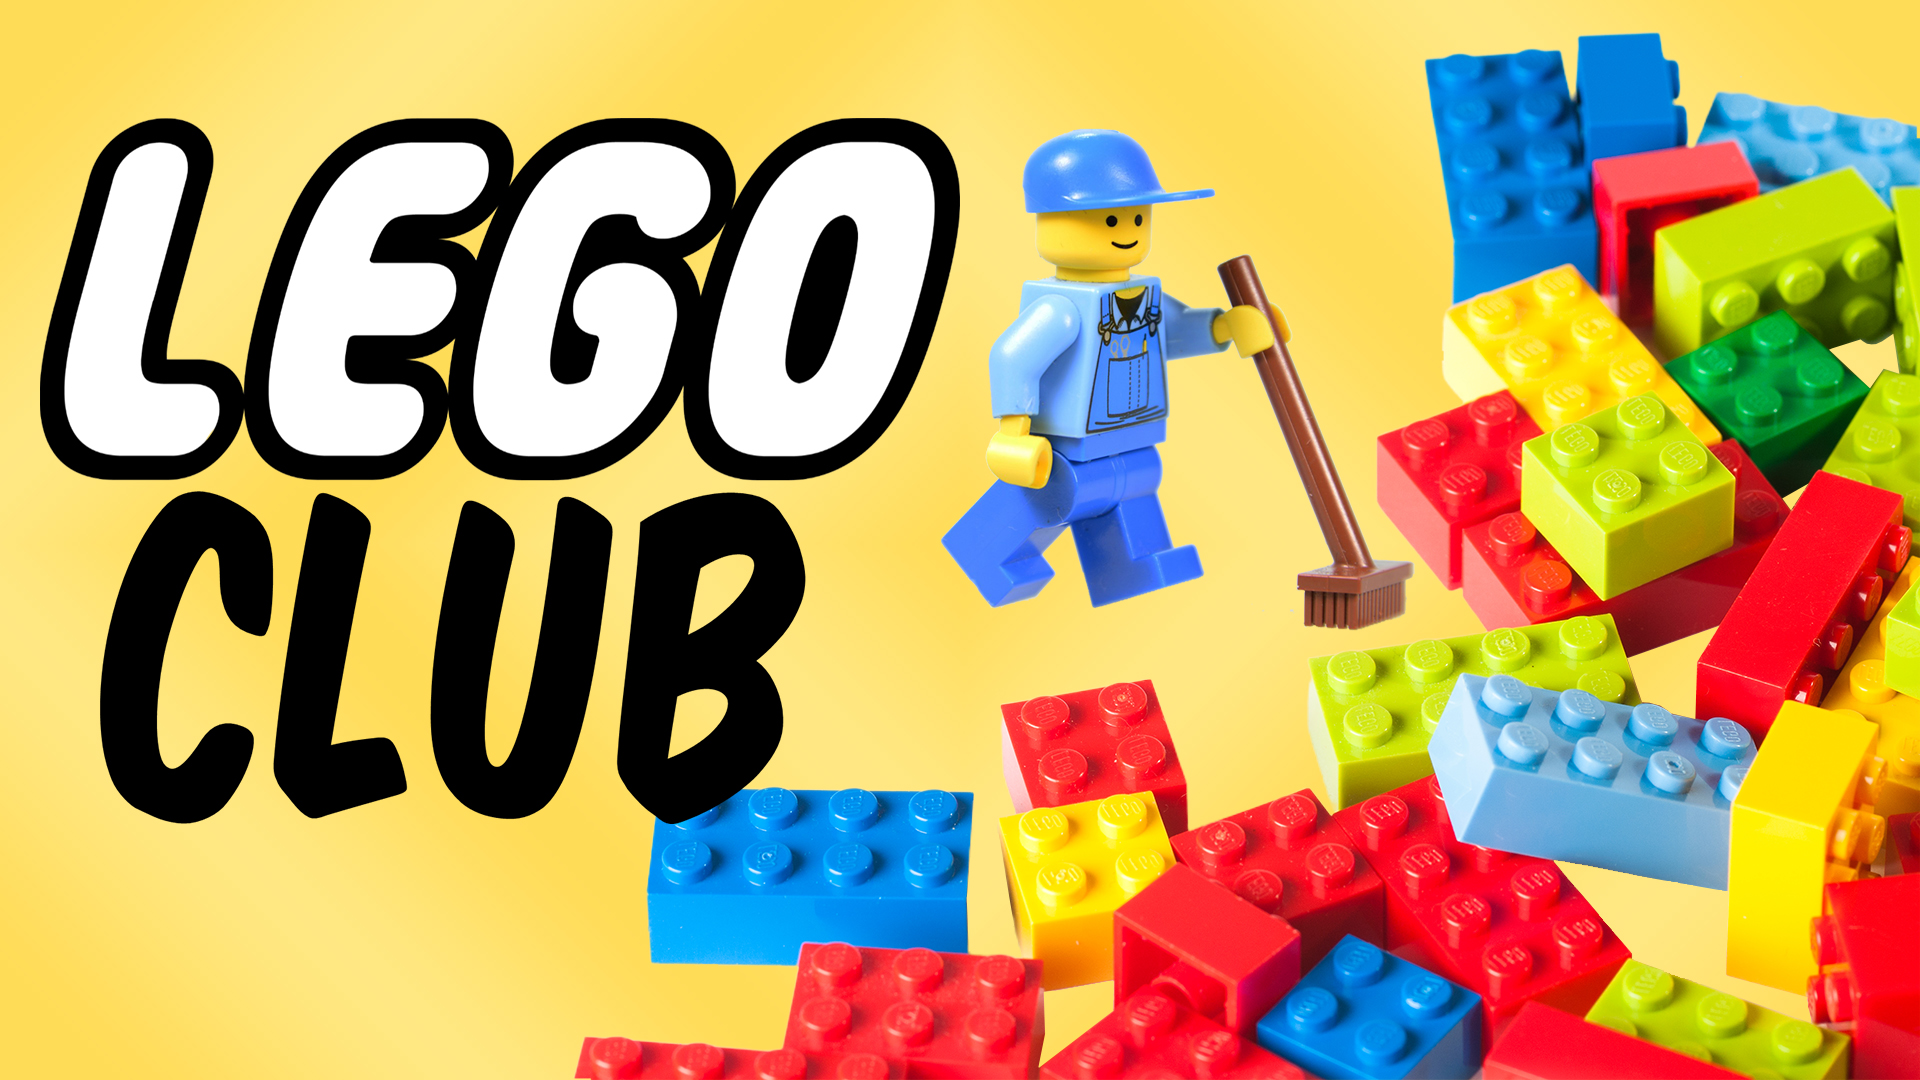 Image reads "LEGO Club" against a yellow background. A LEGO janitor is sweeping LEGOs to the right of the title.